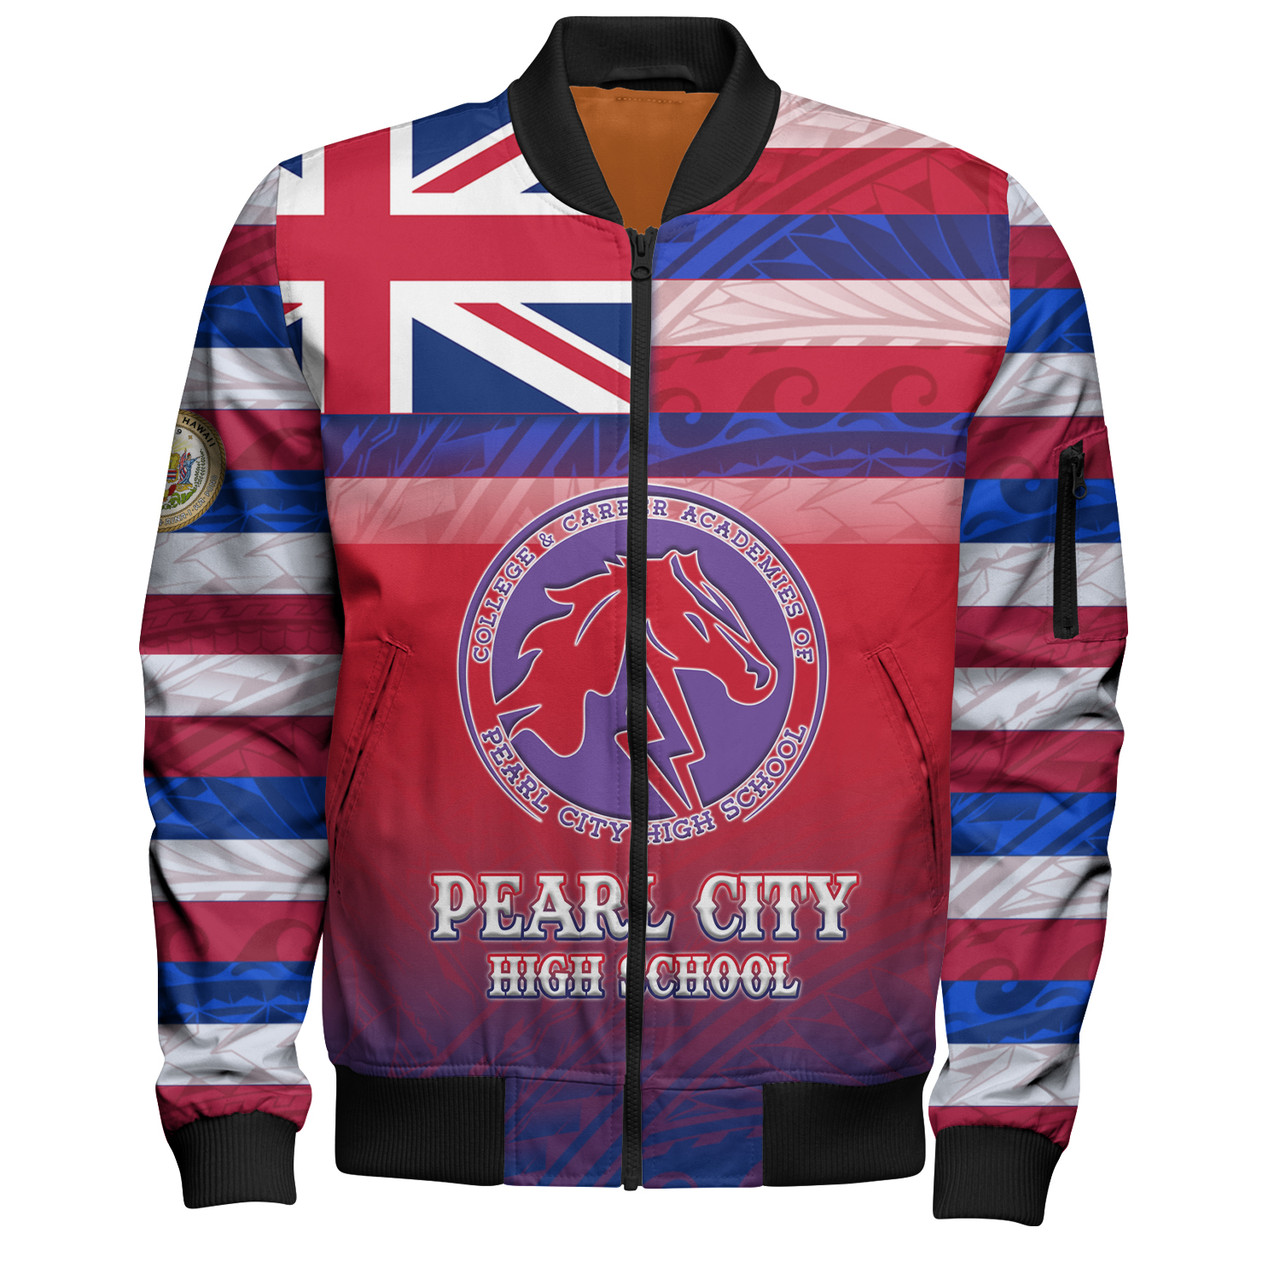 Hawaii Pearl City High School Bomber Jacket Flag Color With Traditional Patterns